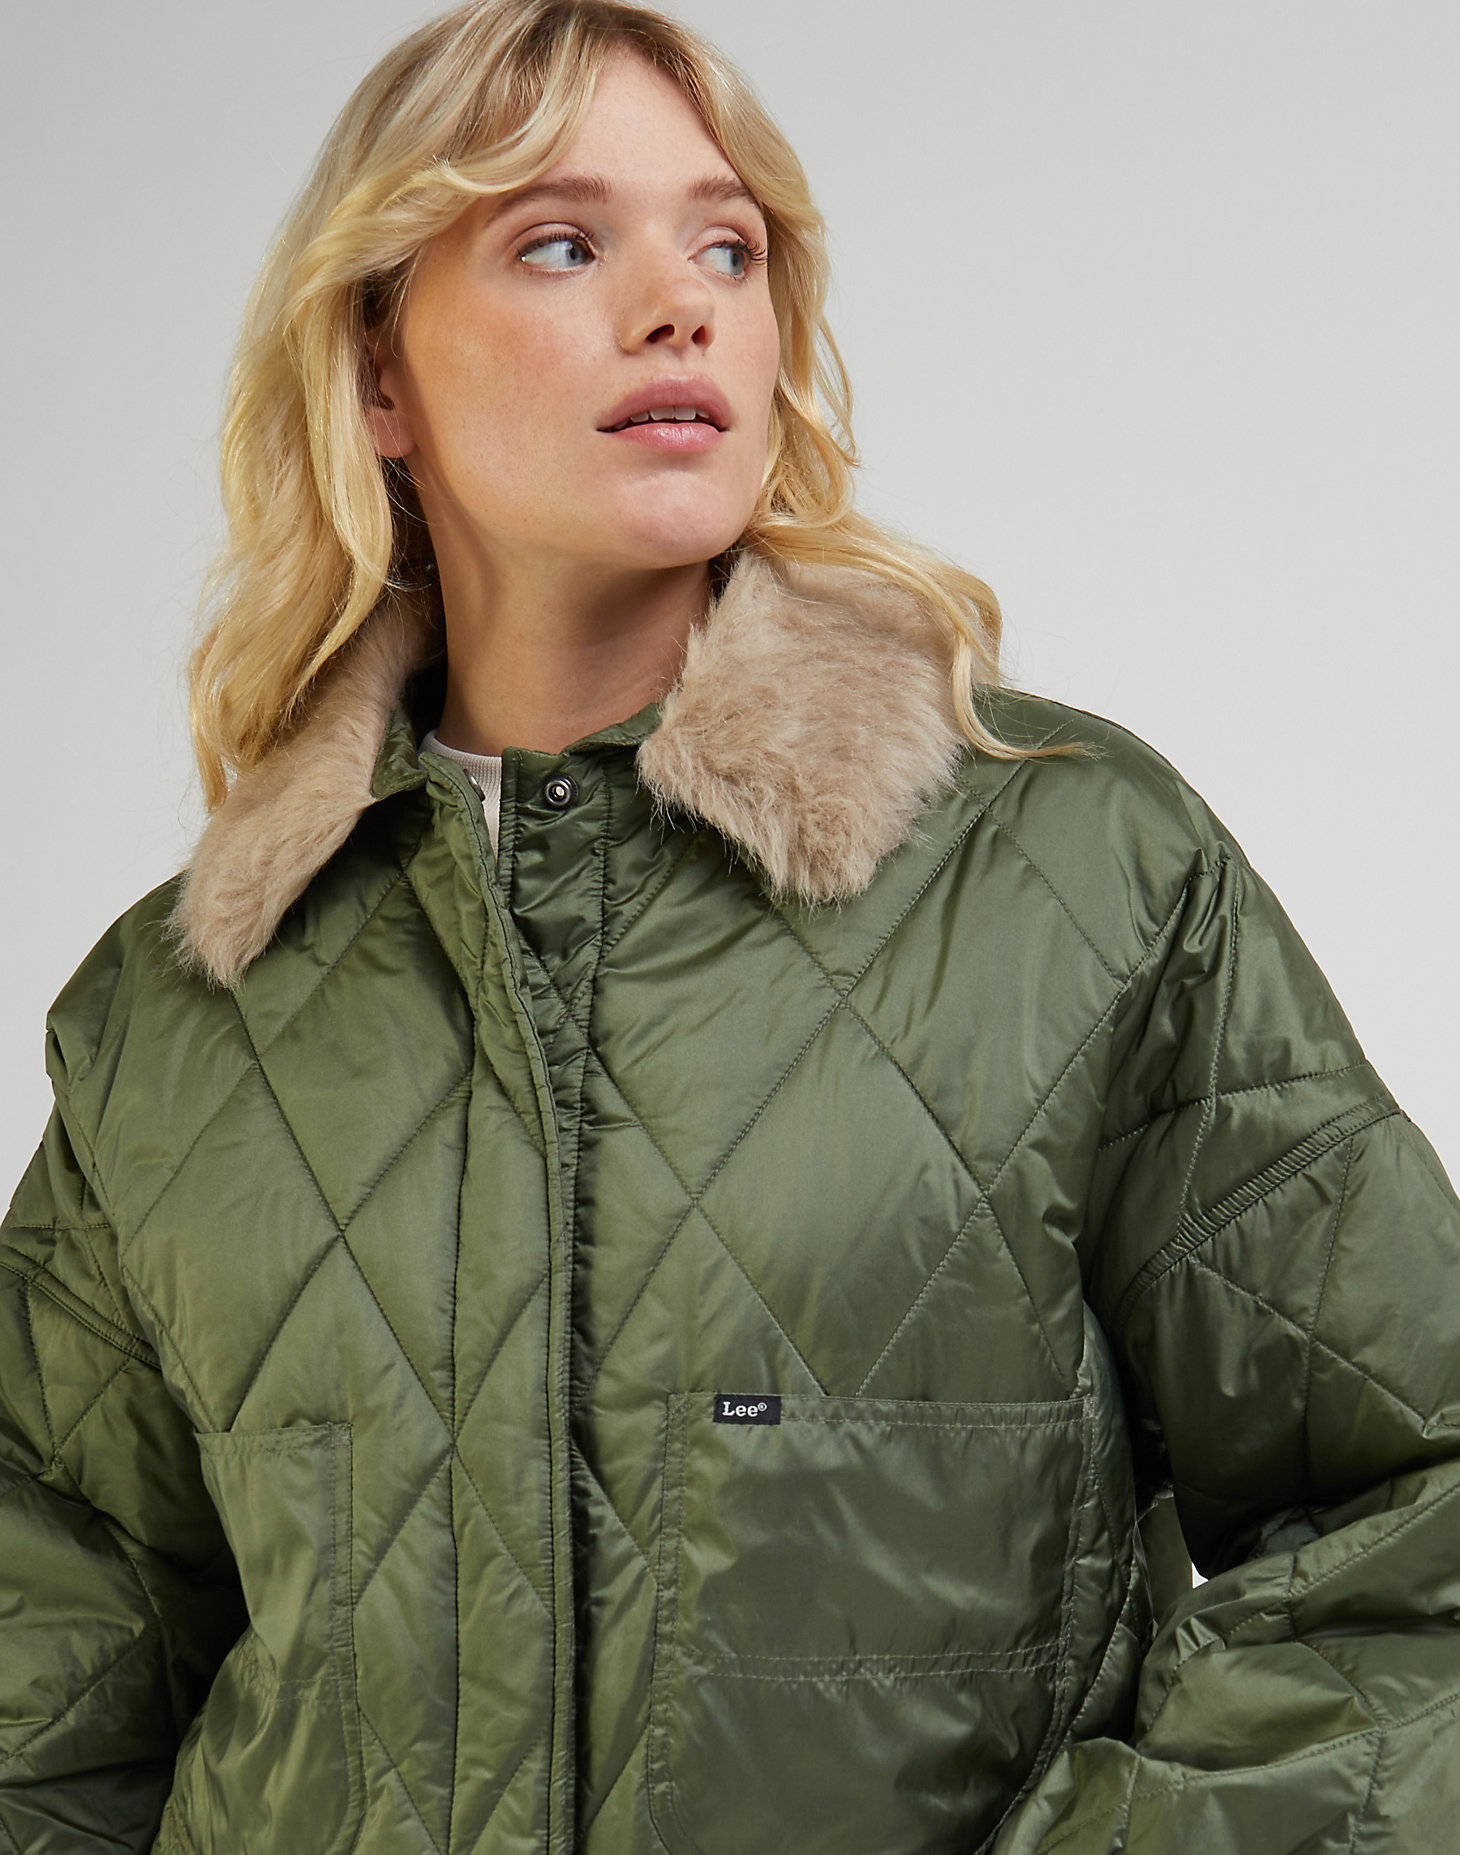 Trans Liner Jacket in Olive Grove alternative view 4